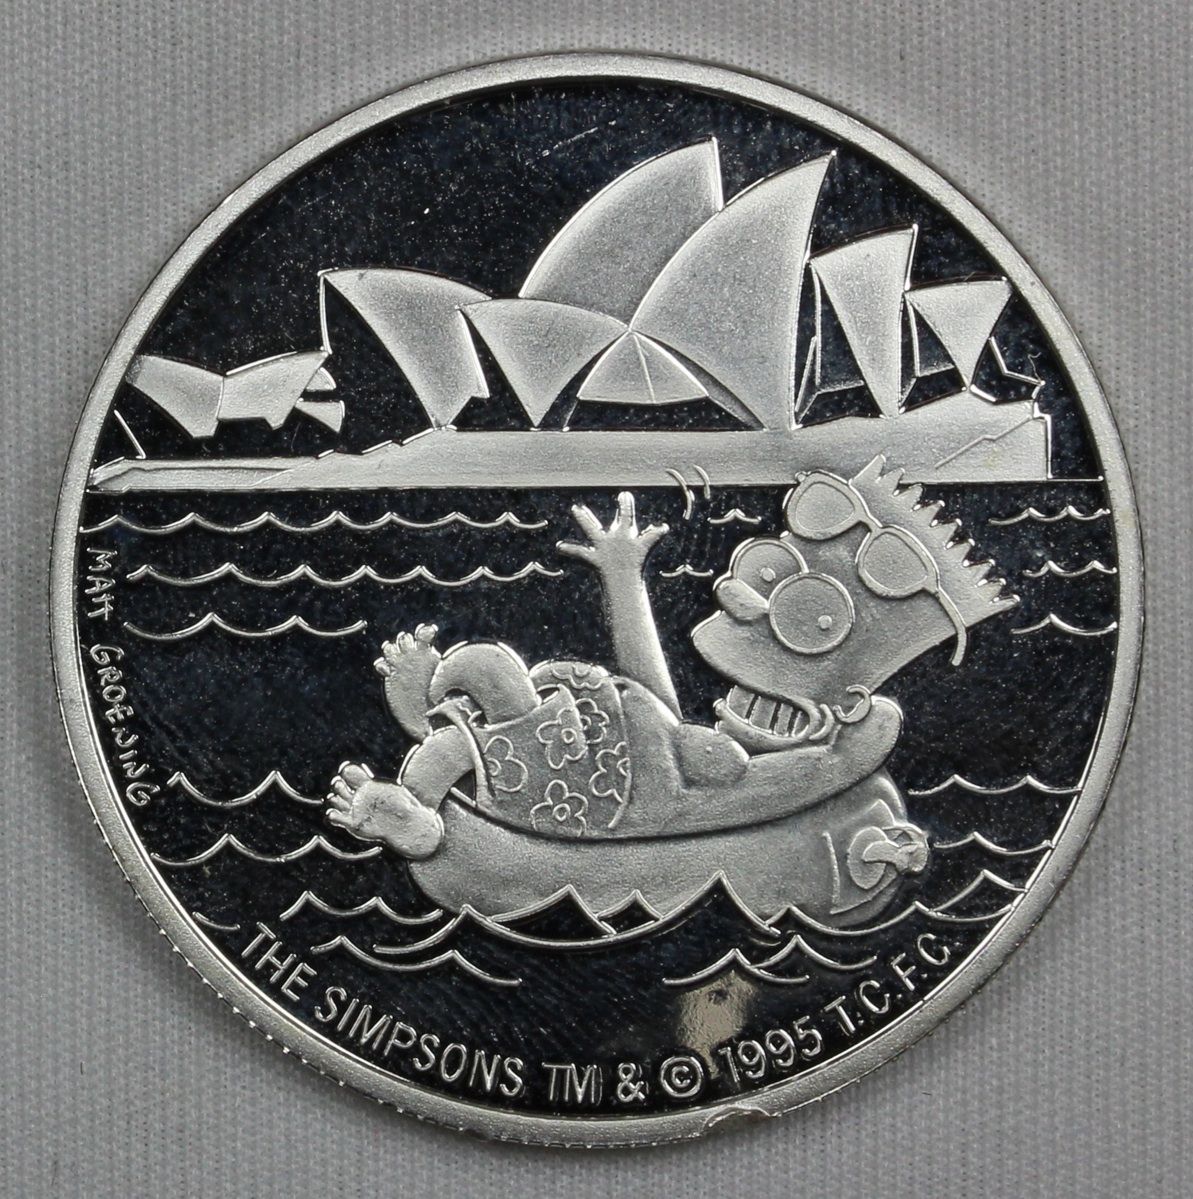 1995 The Simpsons™ 1 oz 999 Silver Limited Edition Collectors Coin